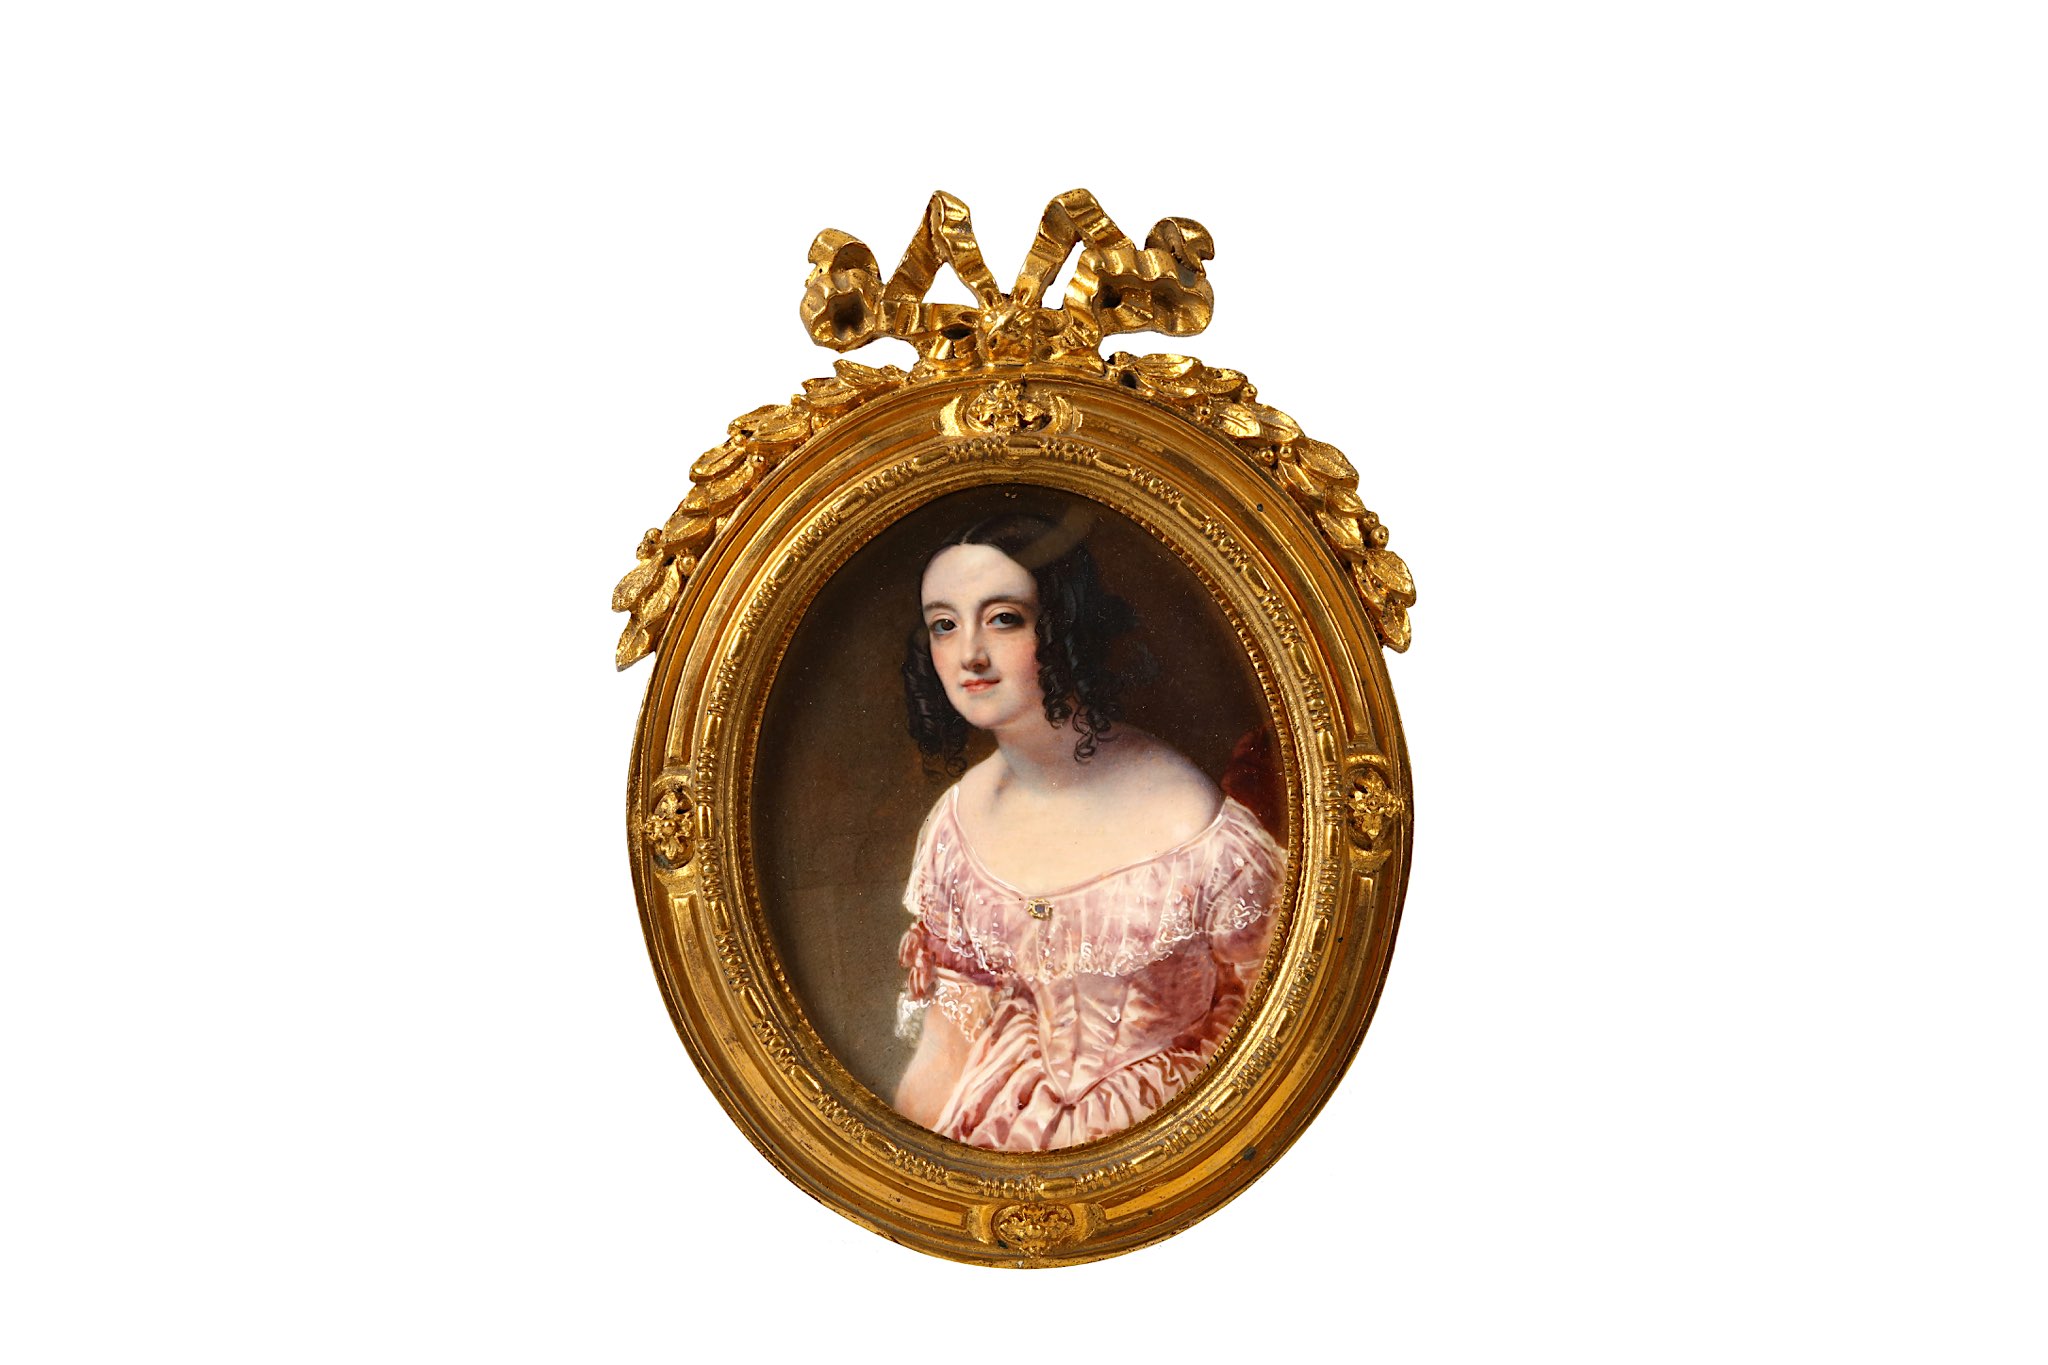 ROBERT THORBURN A.R.A. (1818-1885). Portrait miniature of a Lady, wearing a pink dress with white